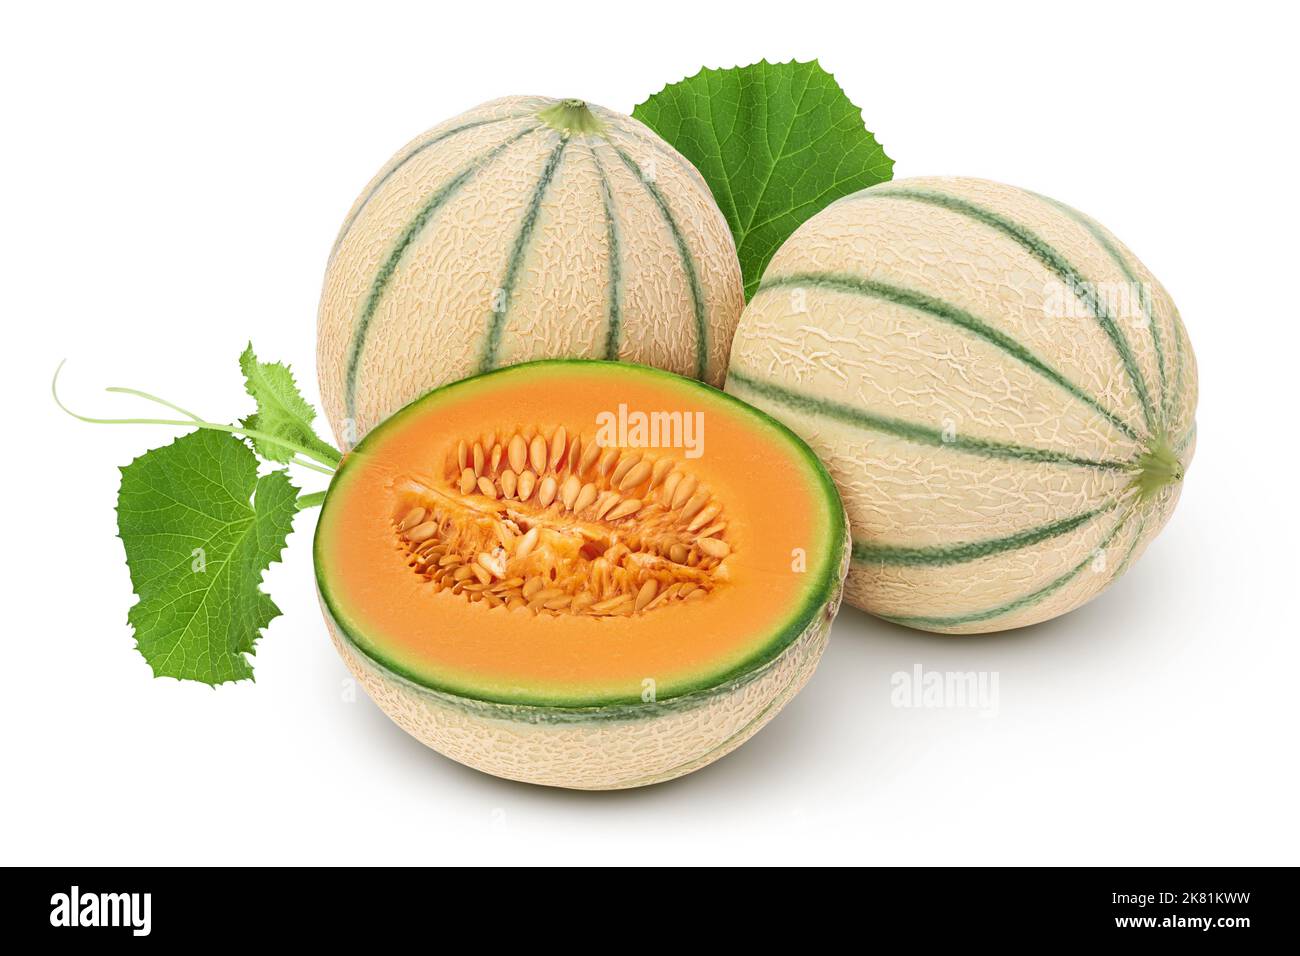 Cantaloupe melon isolated on white background with full depth of field Stock Photo